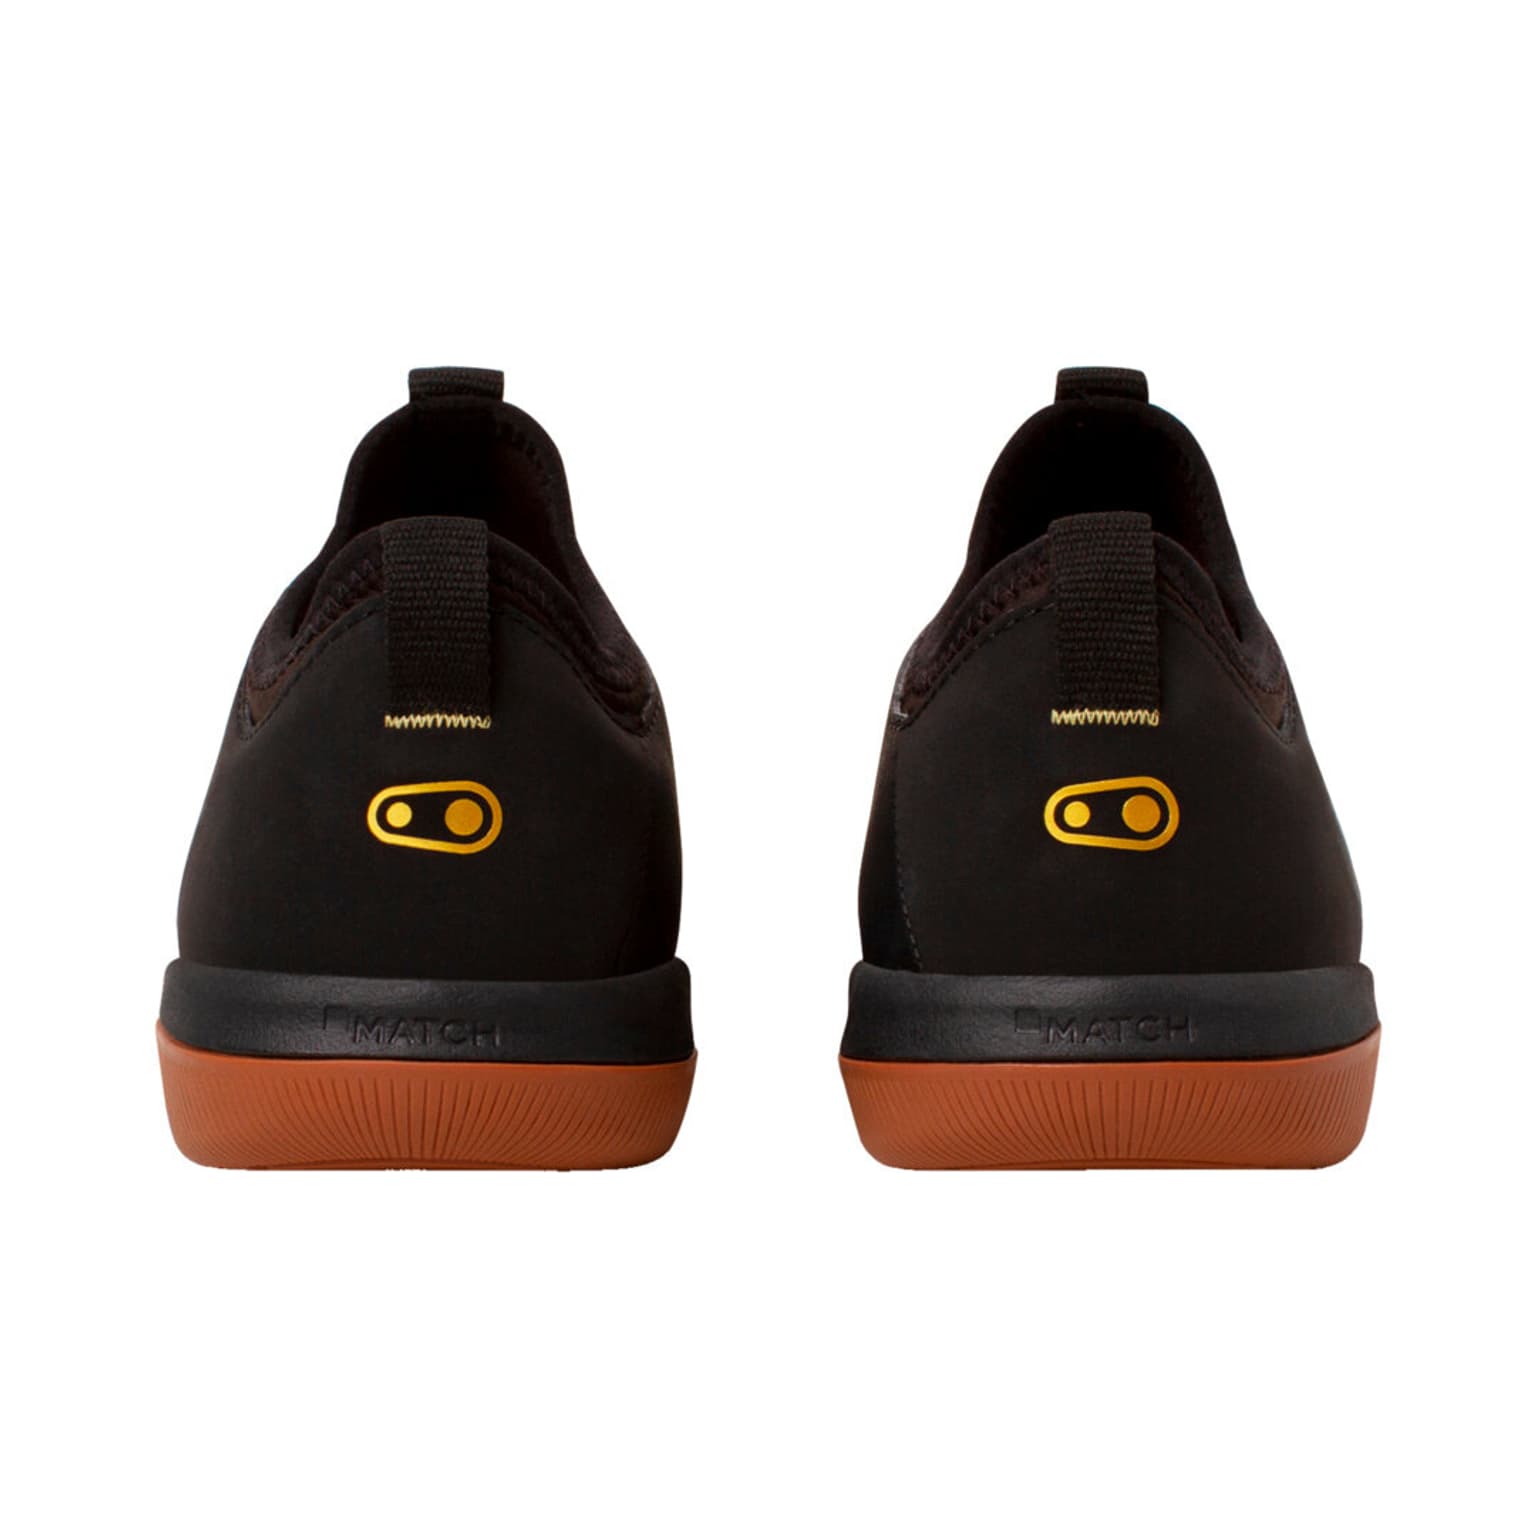 crankbrothers crankbrothers Stamp Street Lace Chaussures de cyclisme noir 2